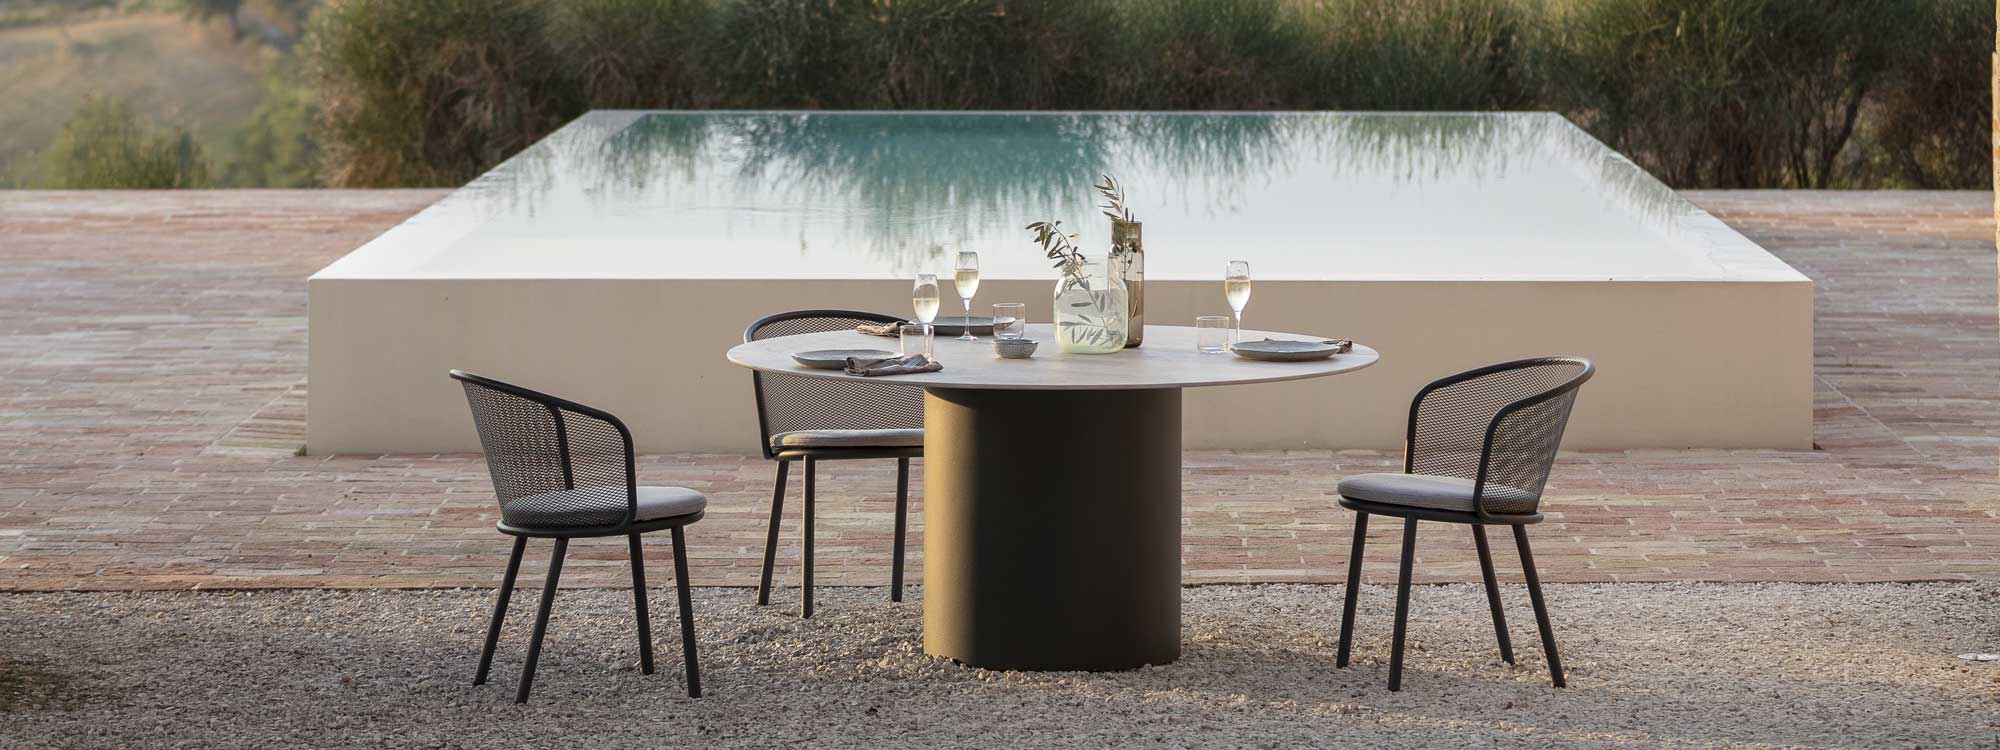 Image of Baza outdoor chair and Branta round garden table in front of swimming pool